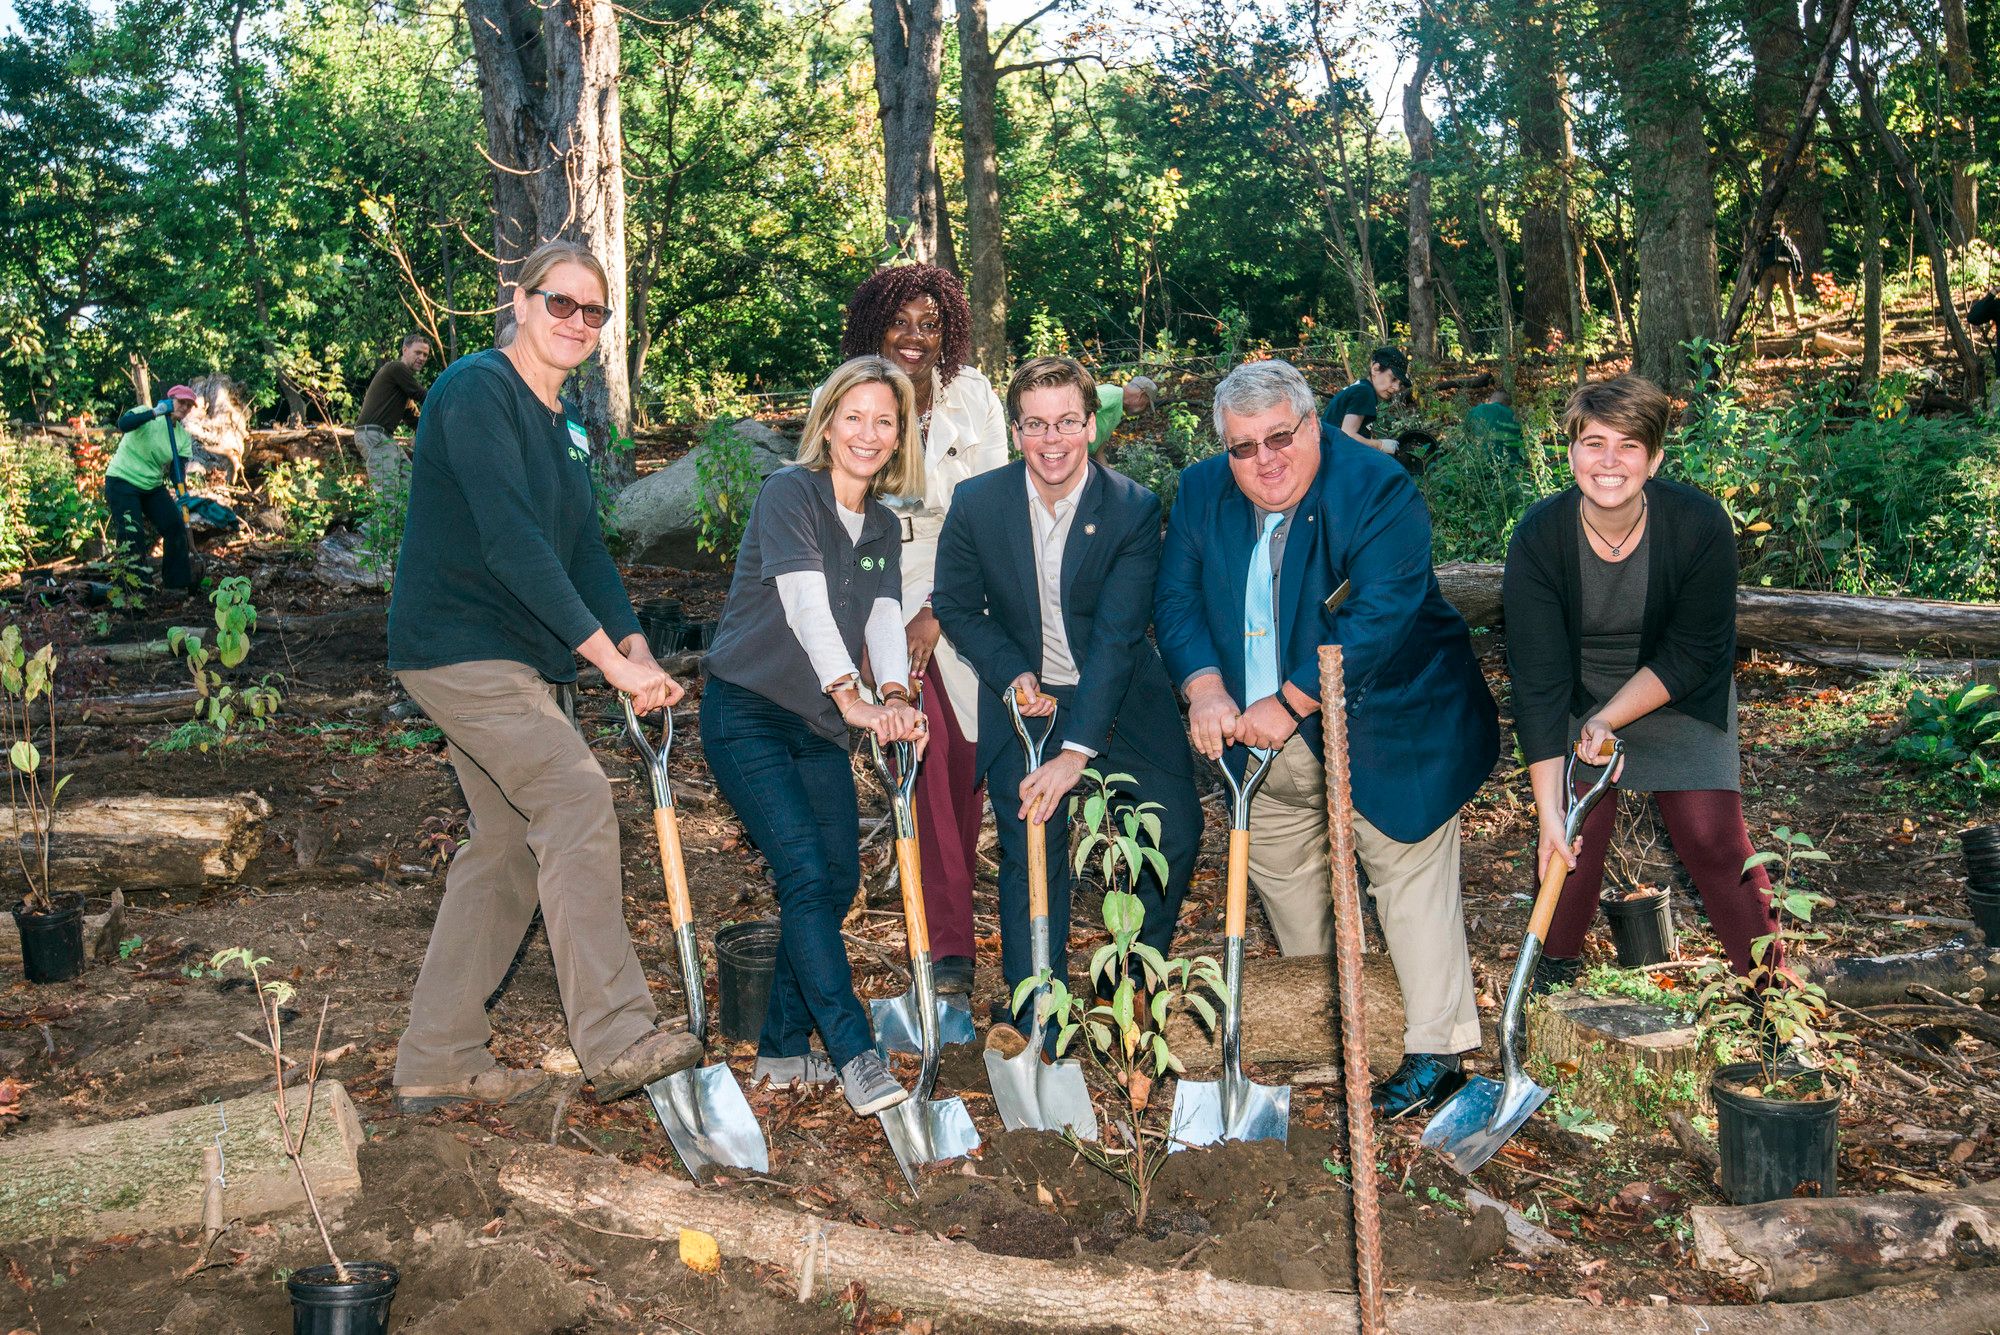 Prospect Park Celebrates 150th Anniversary With Tree Planting And ESB Lighting